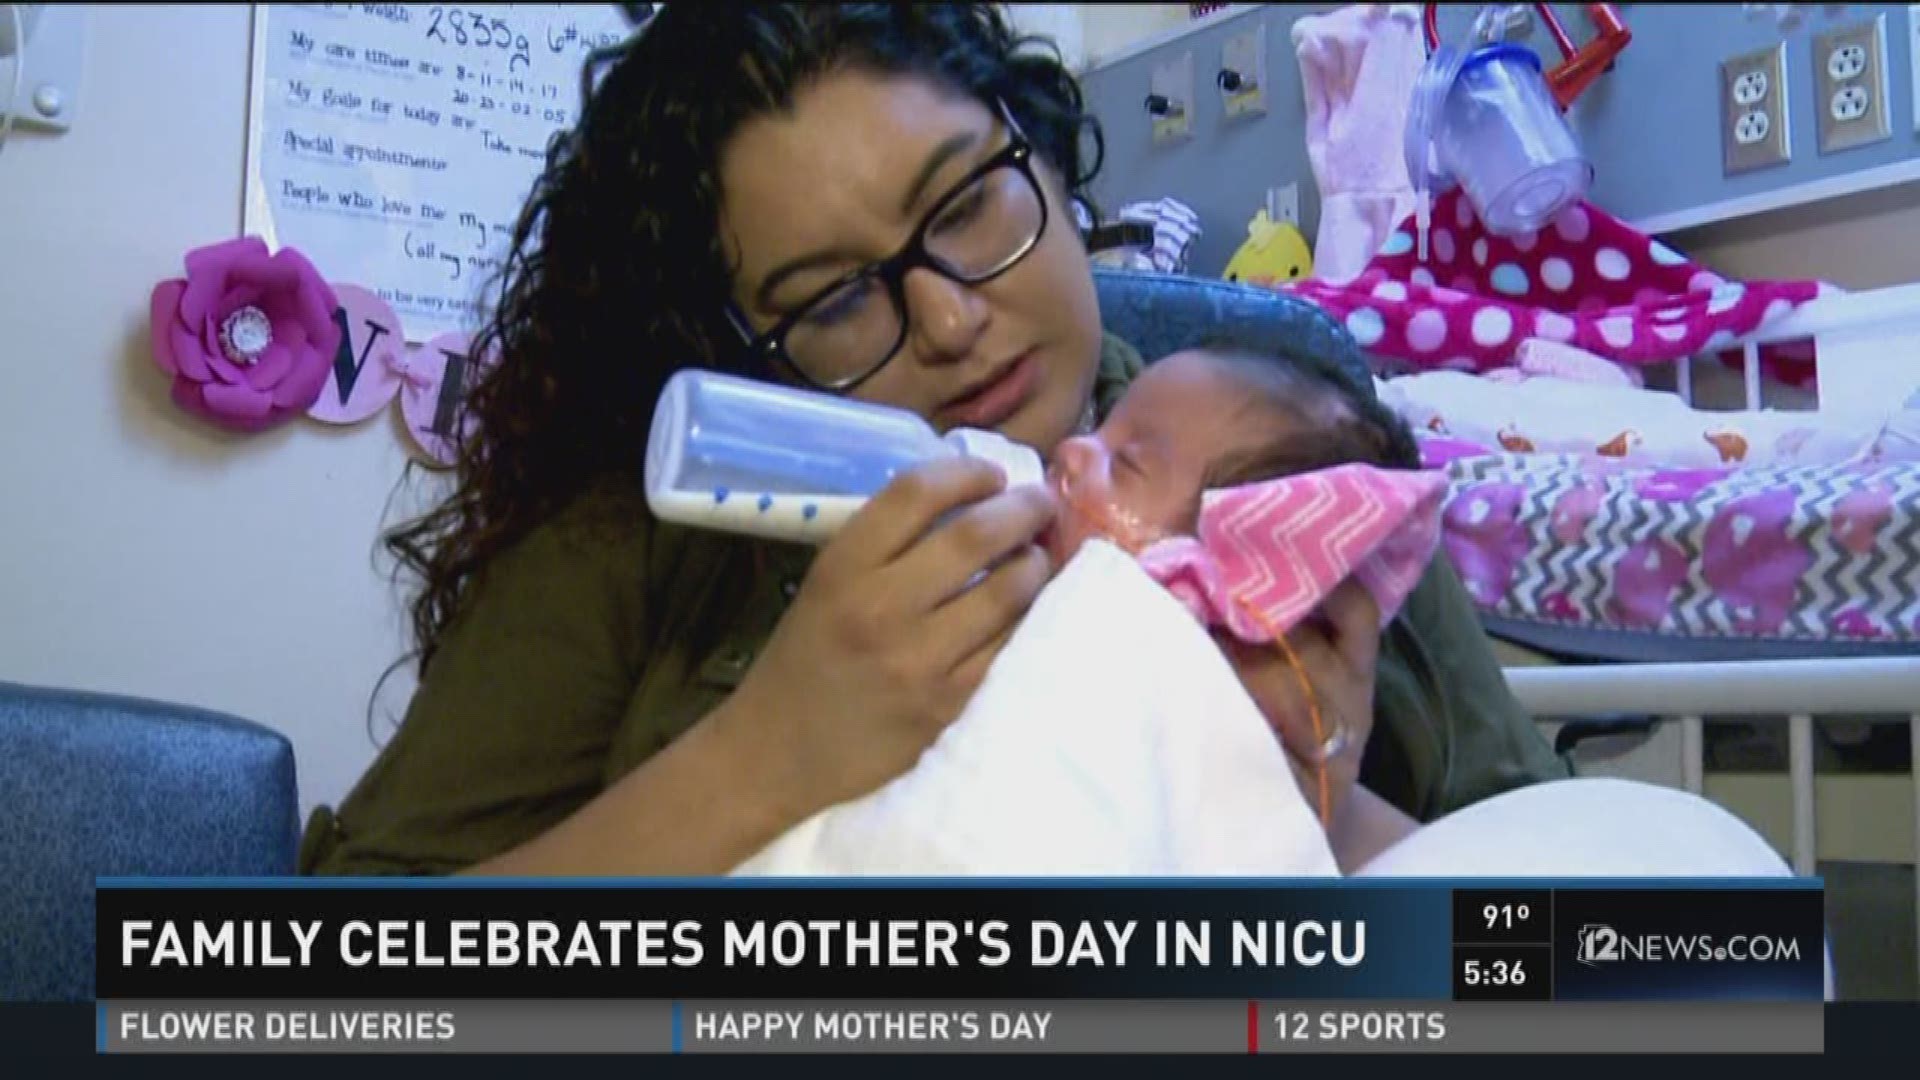 Family celebrates Mother's Day in NICU